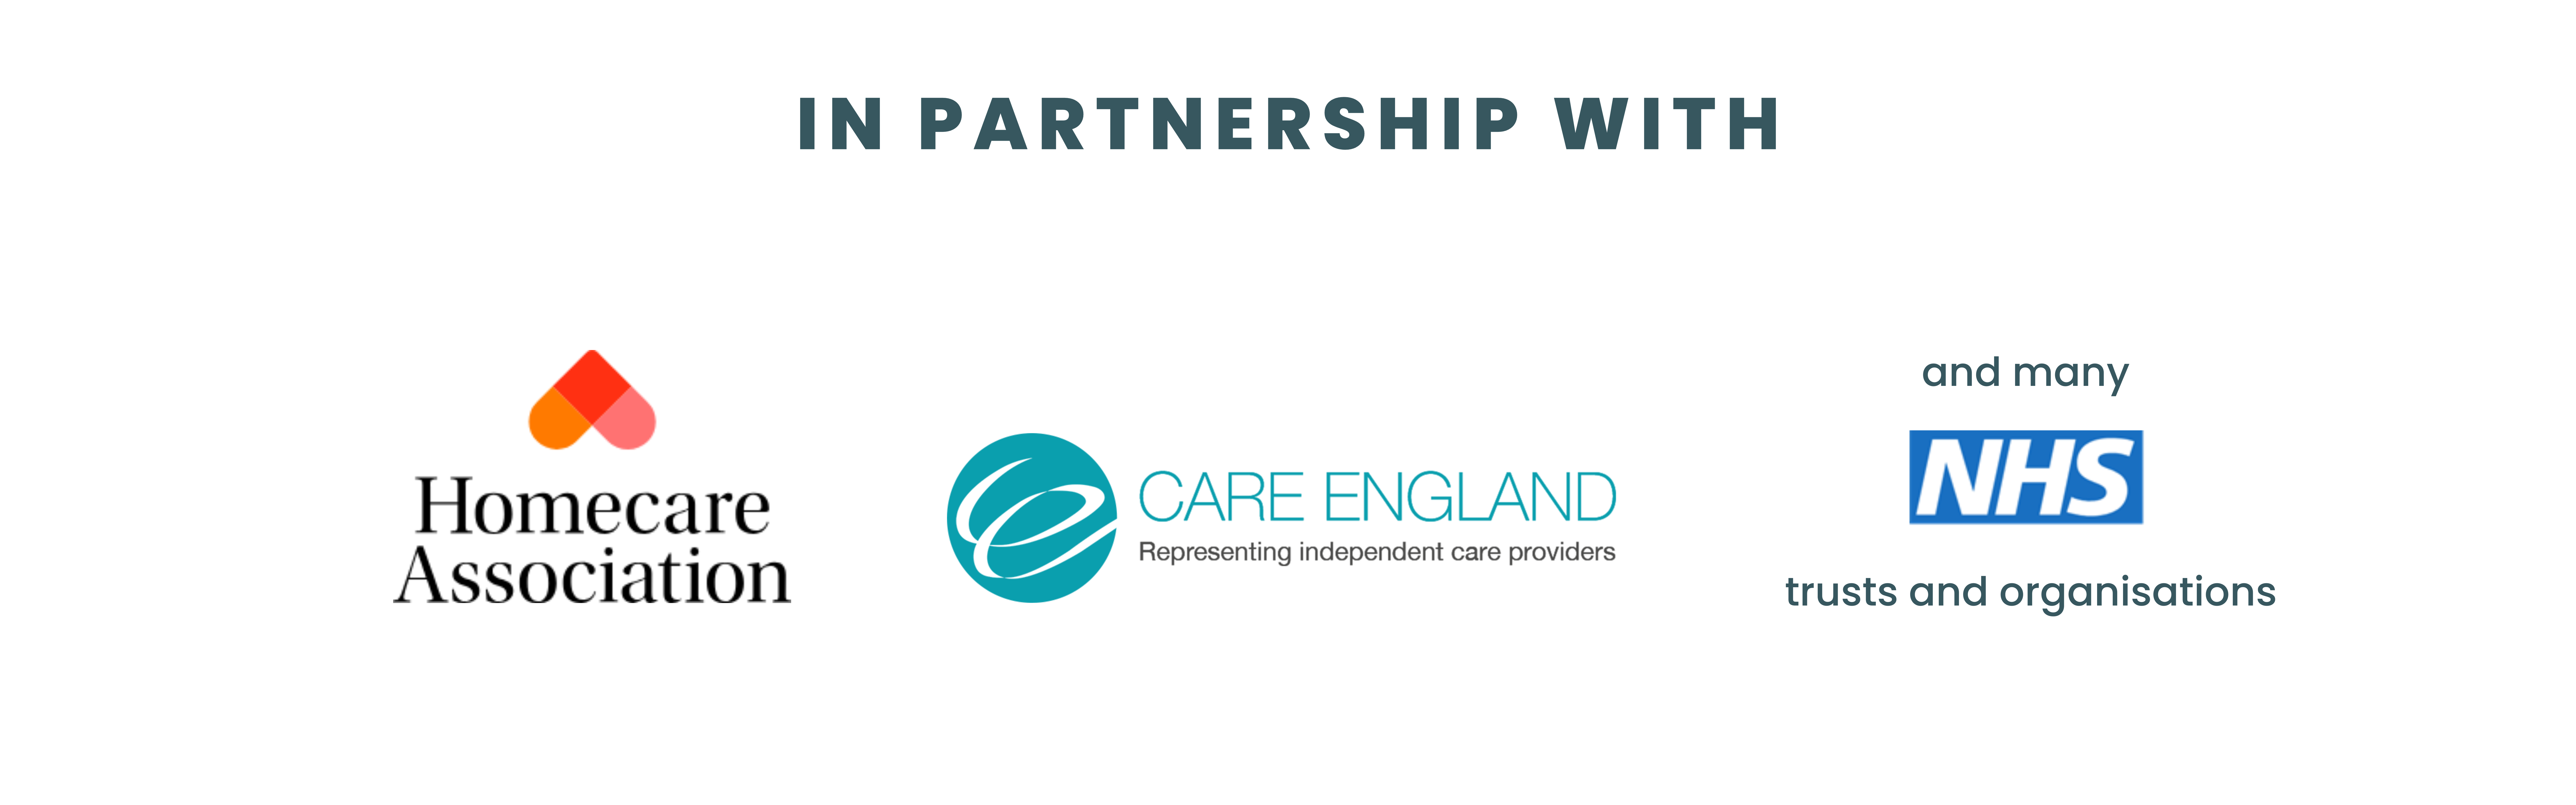 IN PARTNERSHIP WITH Homecare Association (logo); Care England (logo); and many NHS trusts and organisations